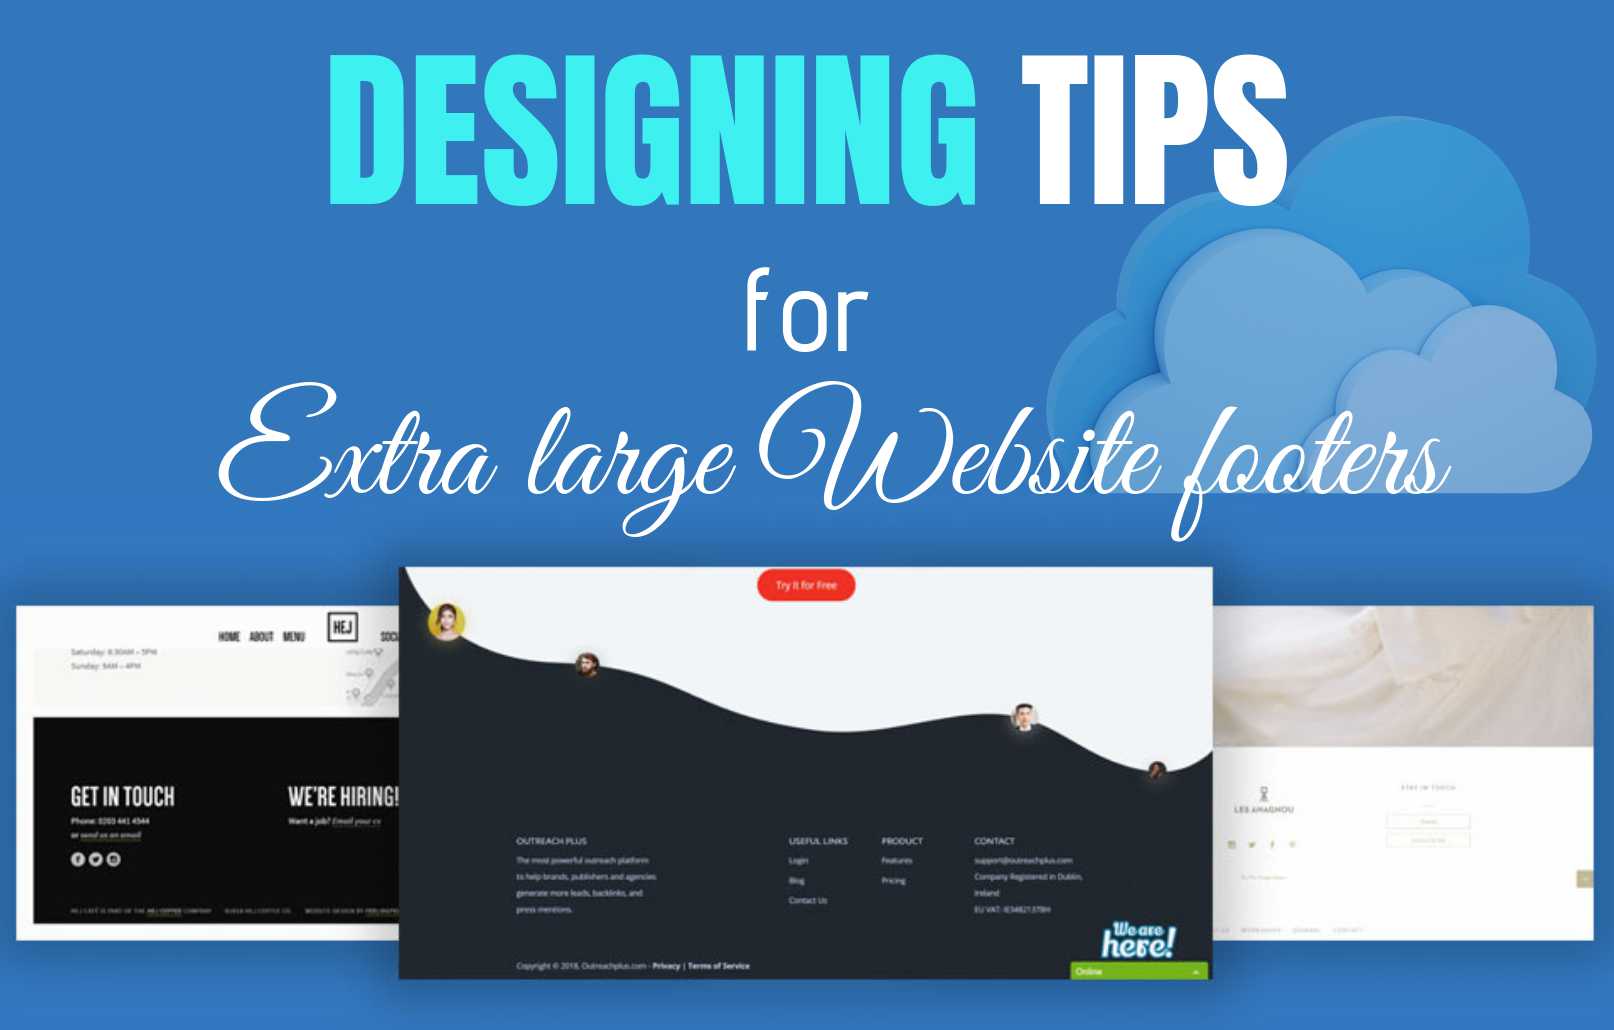 Design Tips for extra Large Website Footers